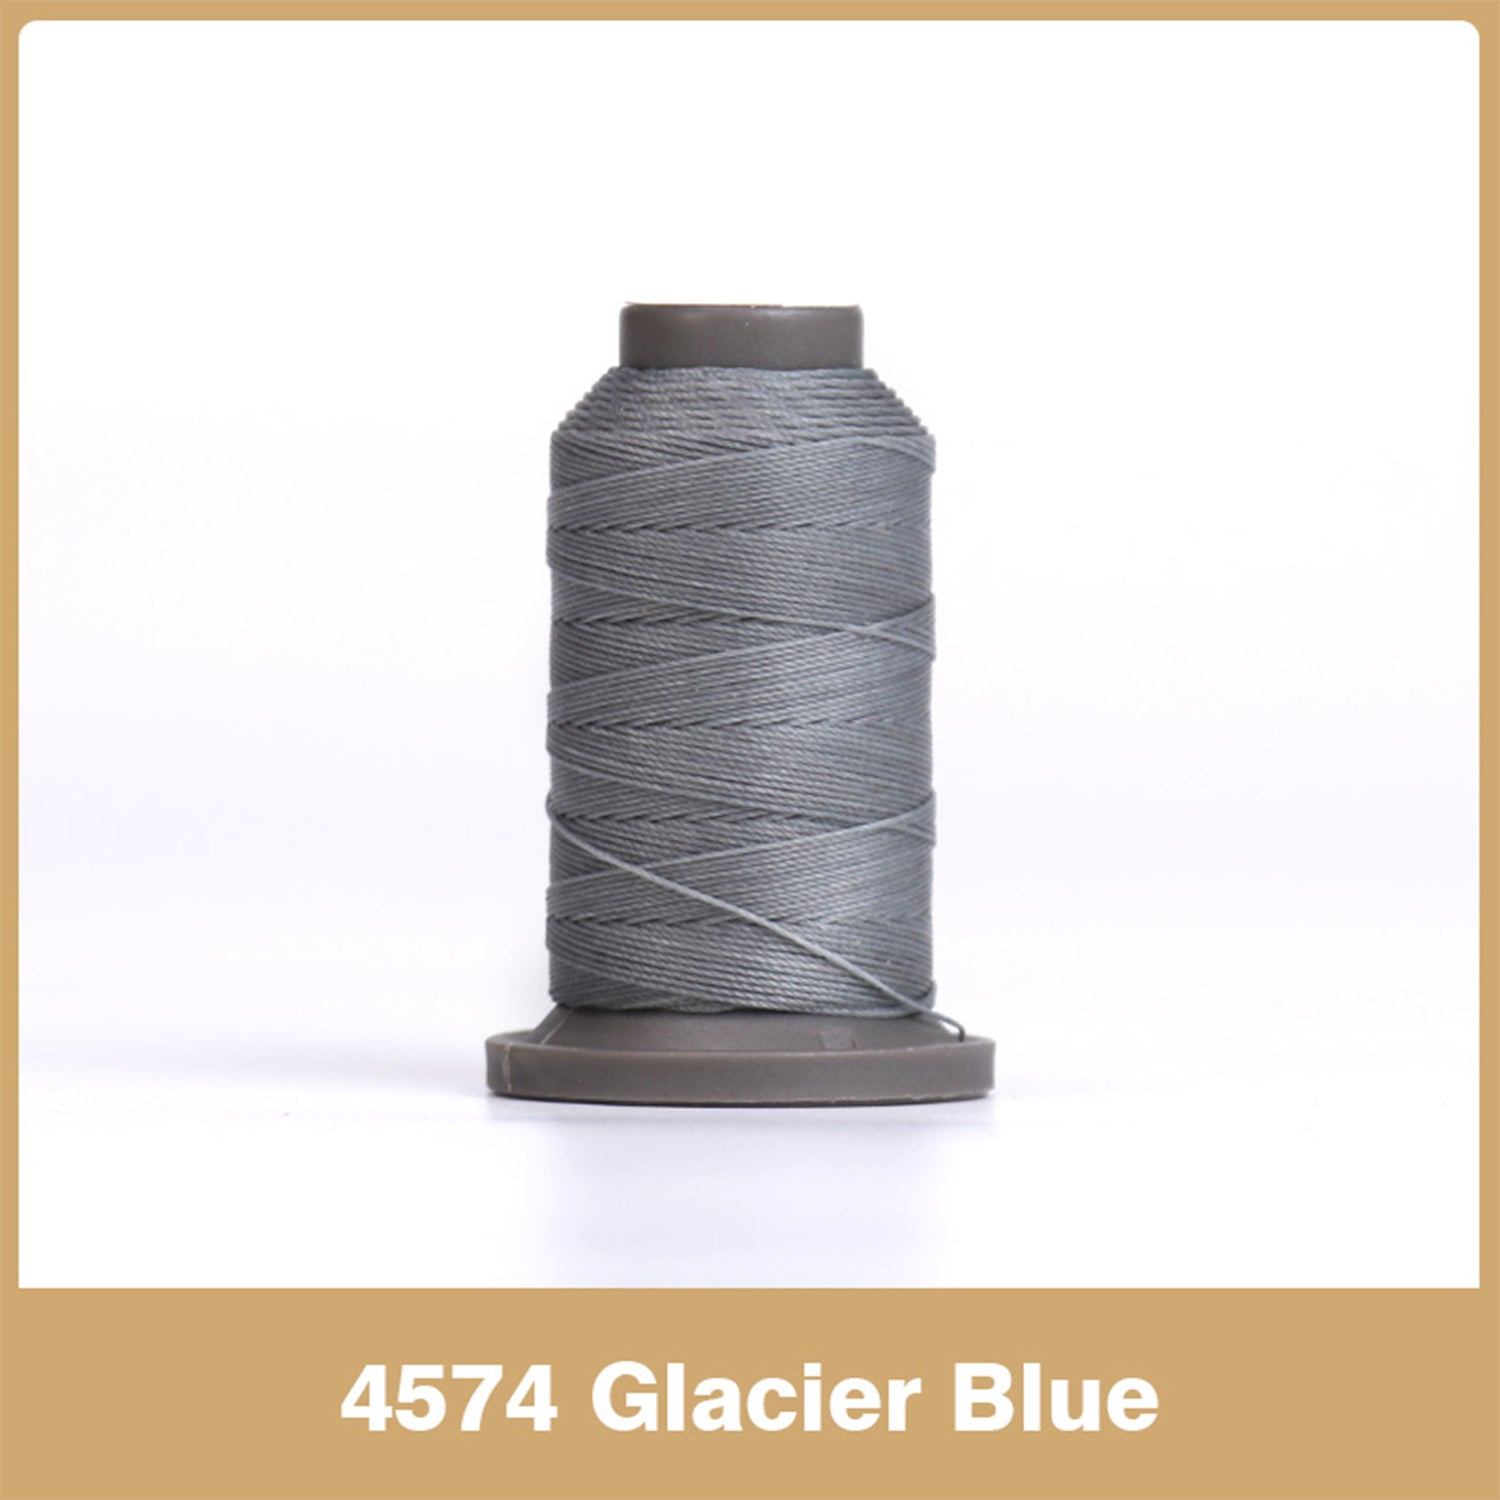 22 Colors 150D Waxed Polyester Thread,leather Sewing Thread